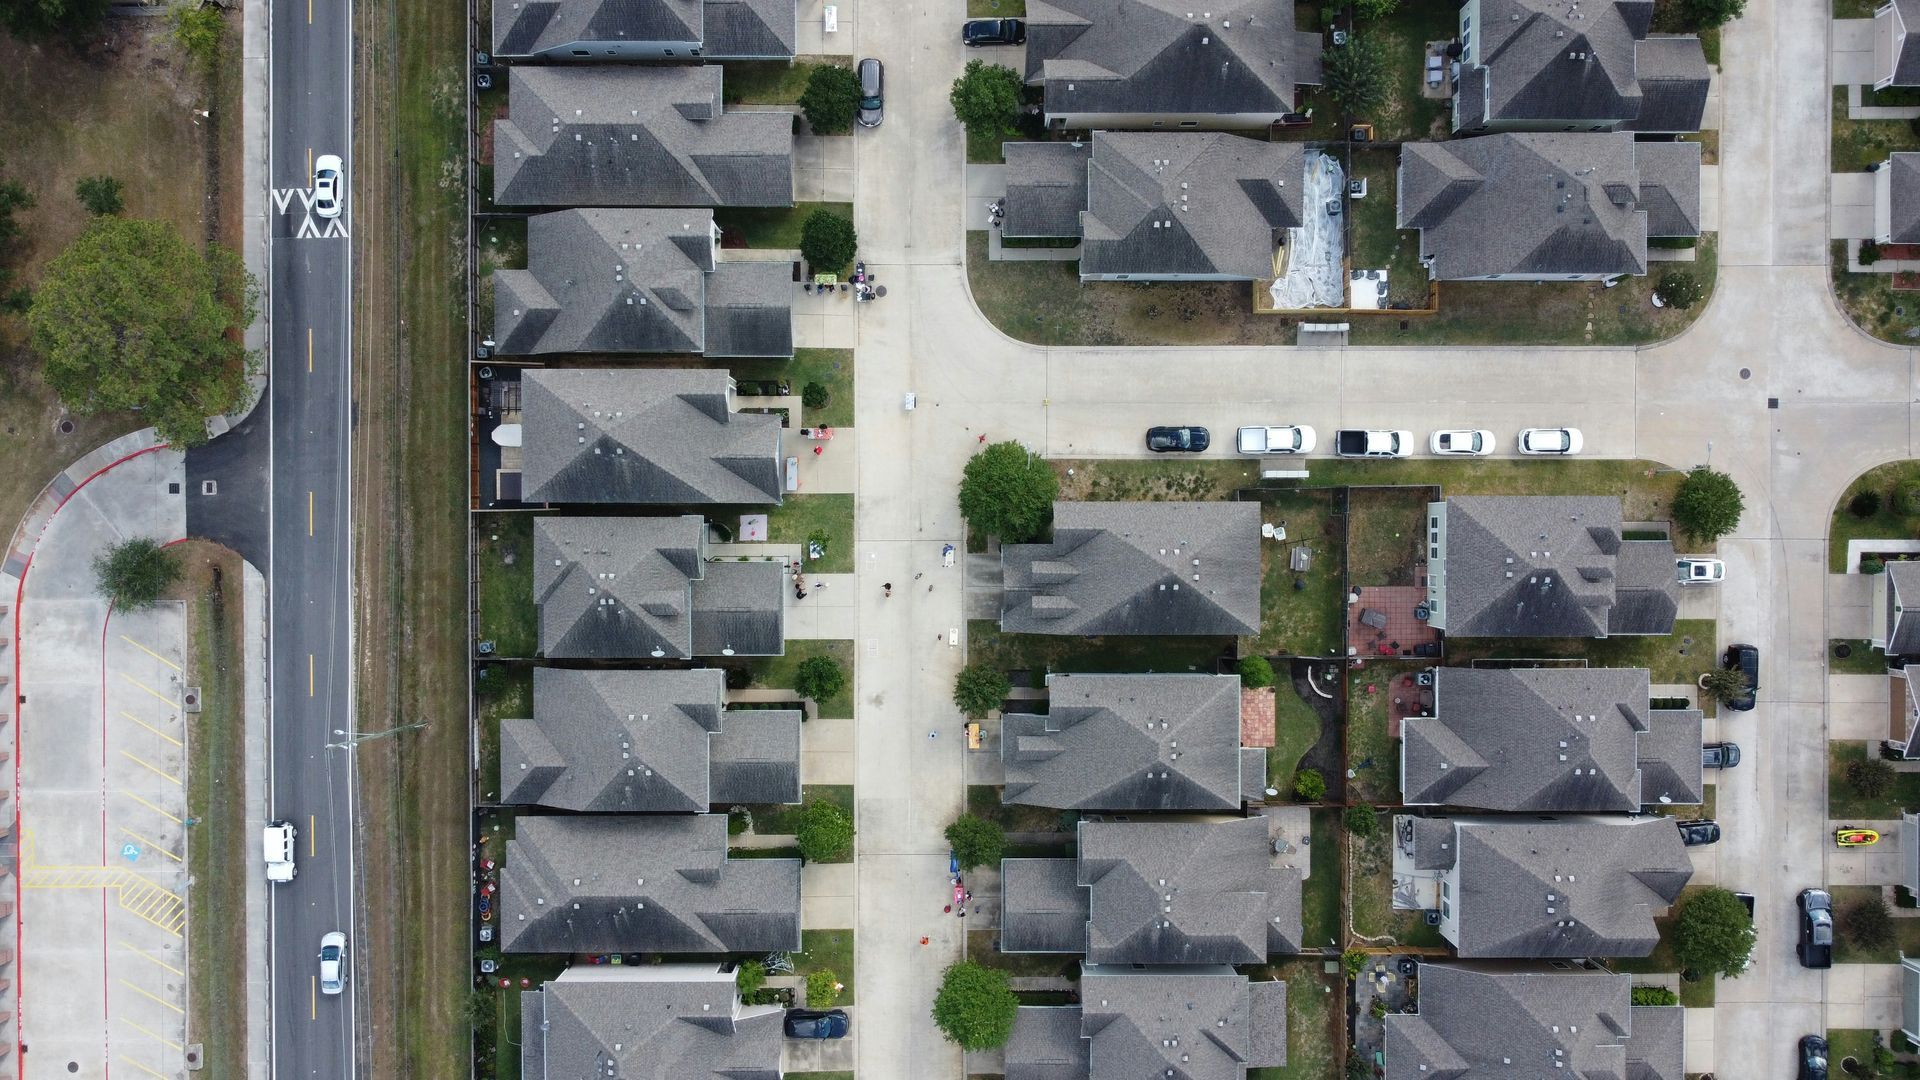 An aerial photograph of a suburban neighborhood. Rows of closely spaced single-family homes.